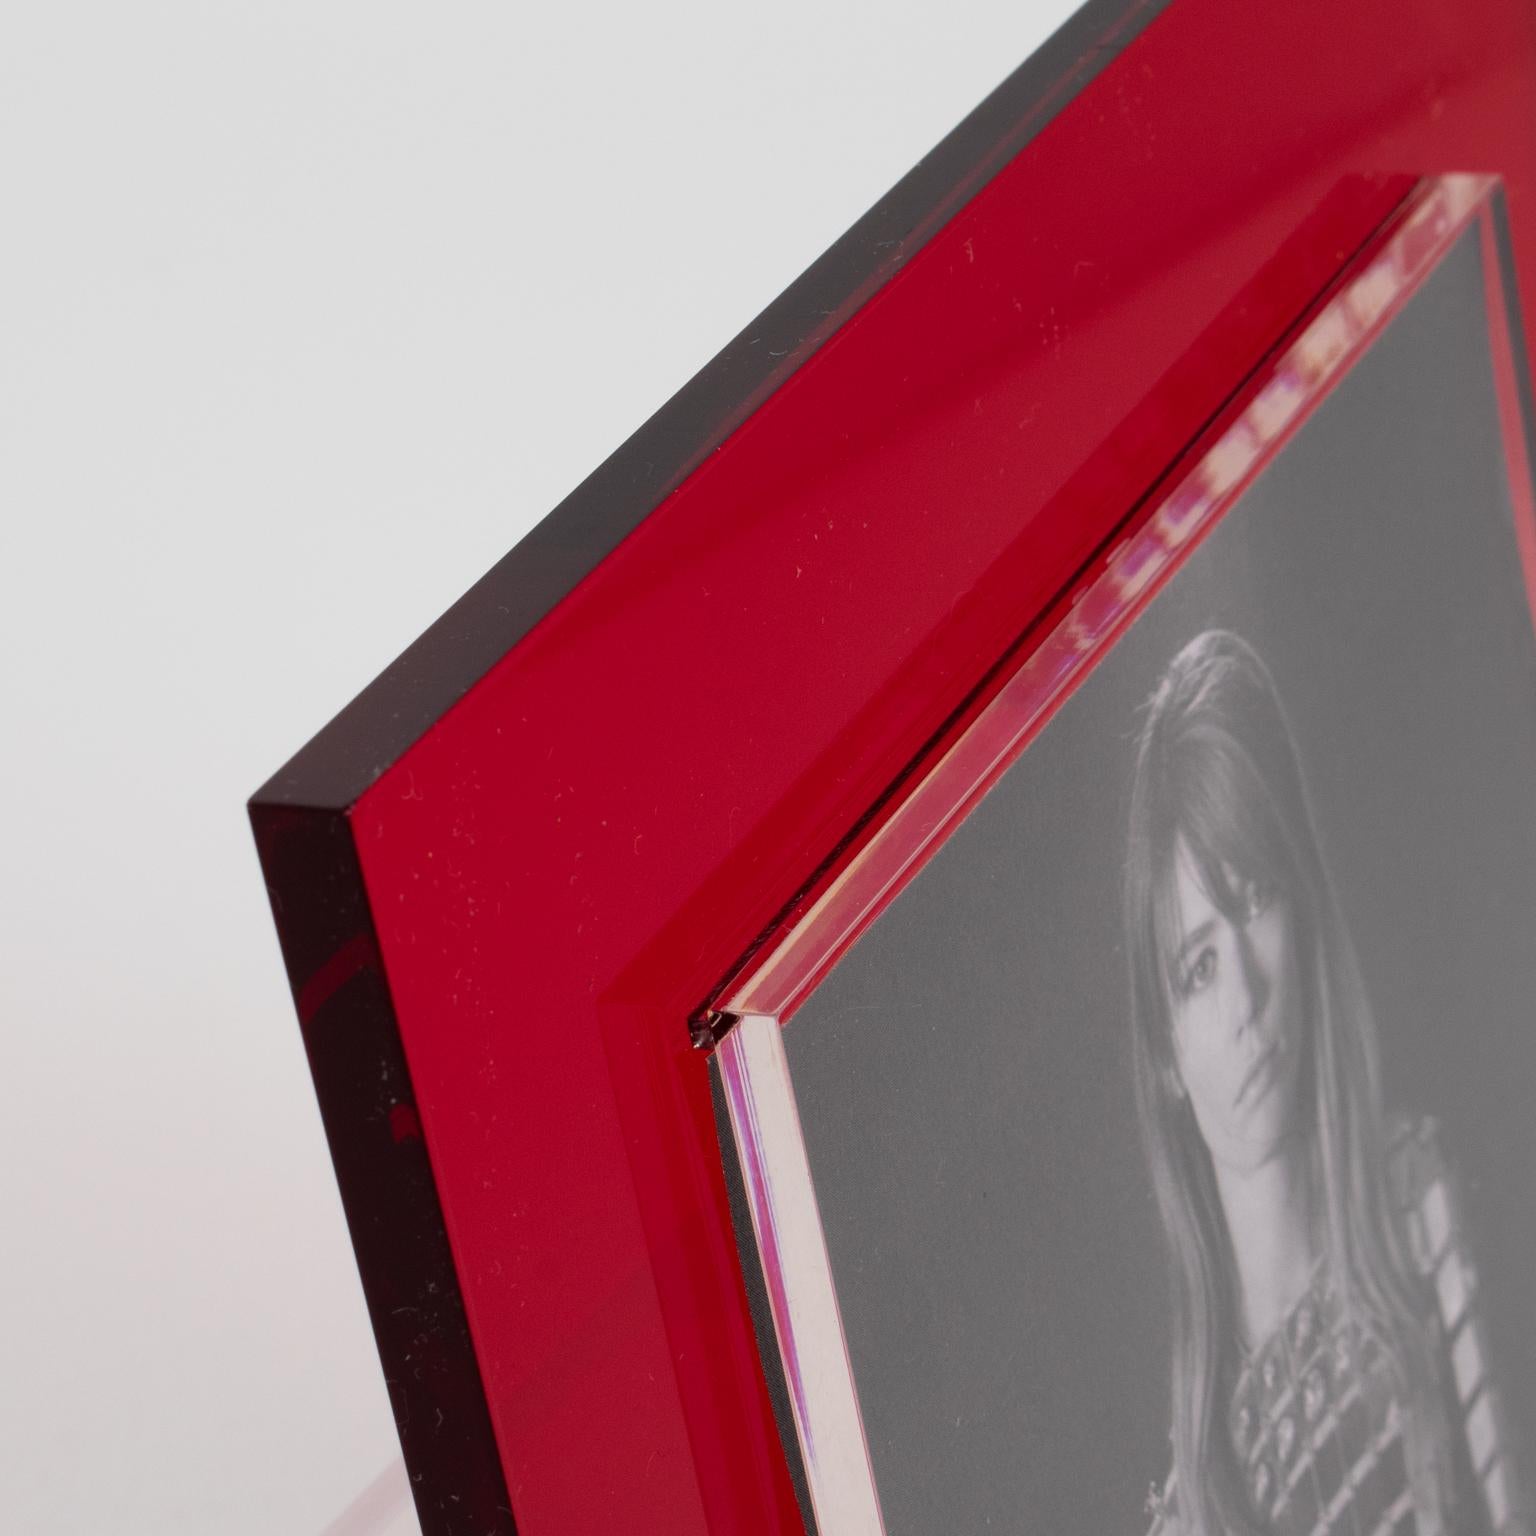 Acrylic Pop Art Modernist Neon Red Lucite Picture Frame, Italy 1970s For Sale